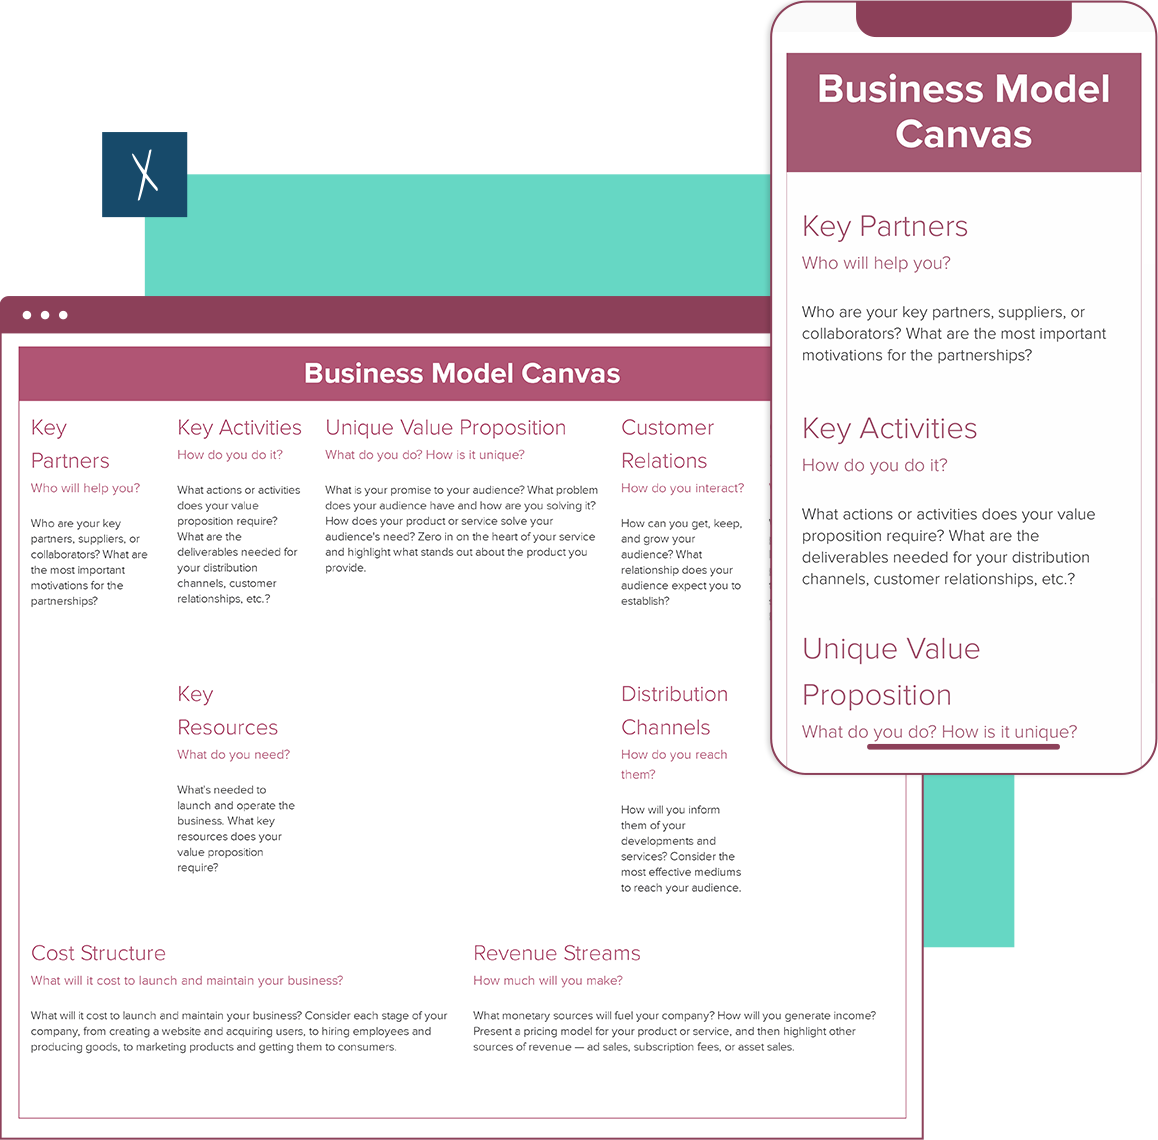 Business Model Canvas Template |  Desktop and Mobile Views